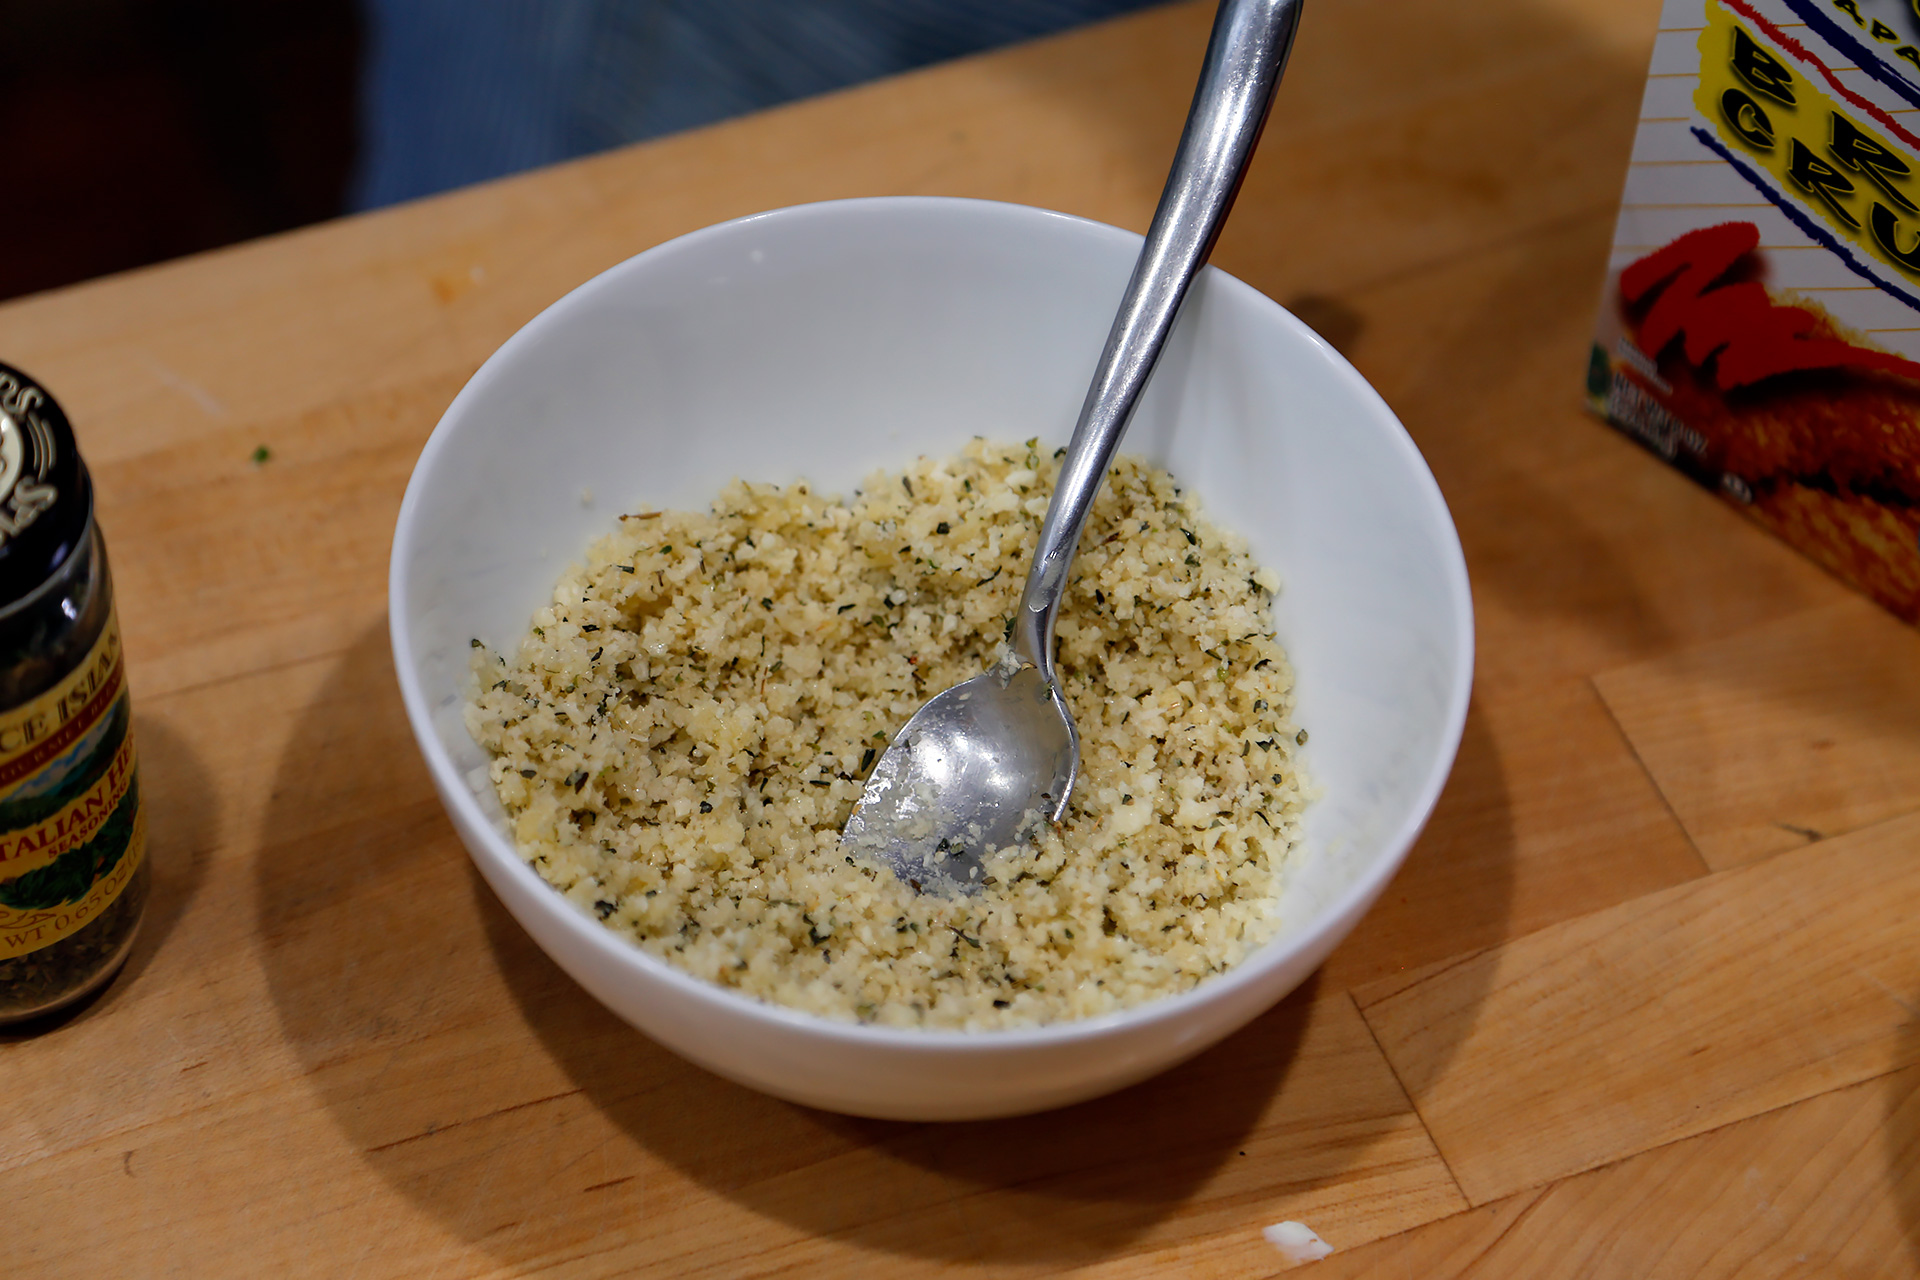 Melt the remaining 1 tbsp butter. In a bowl, stir together the remaining 1/4 cup Parmesan, the panko, herb seasoning, and the melted butter. 